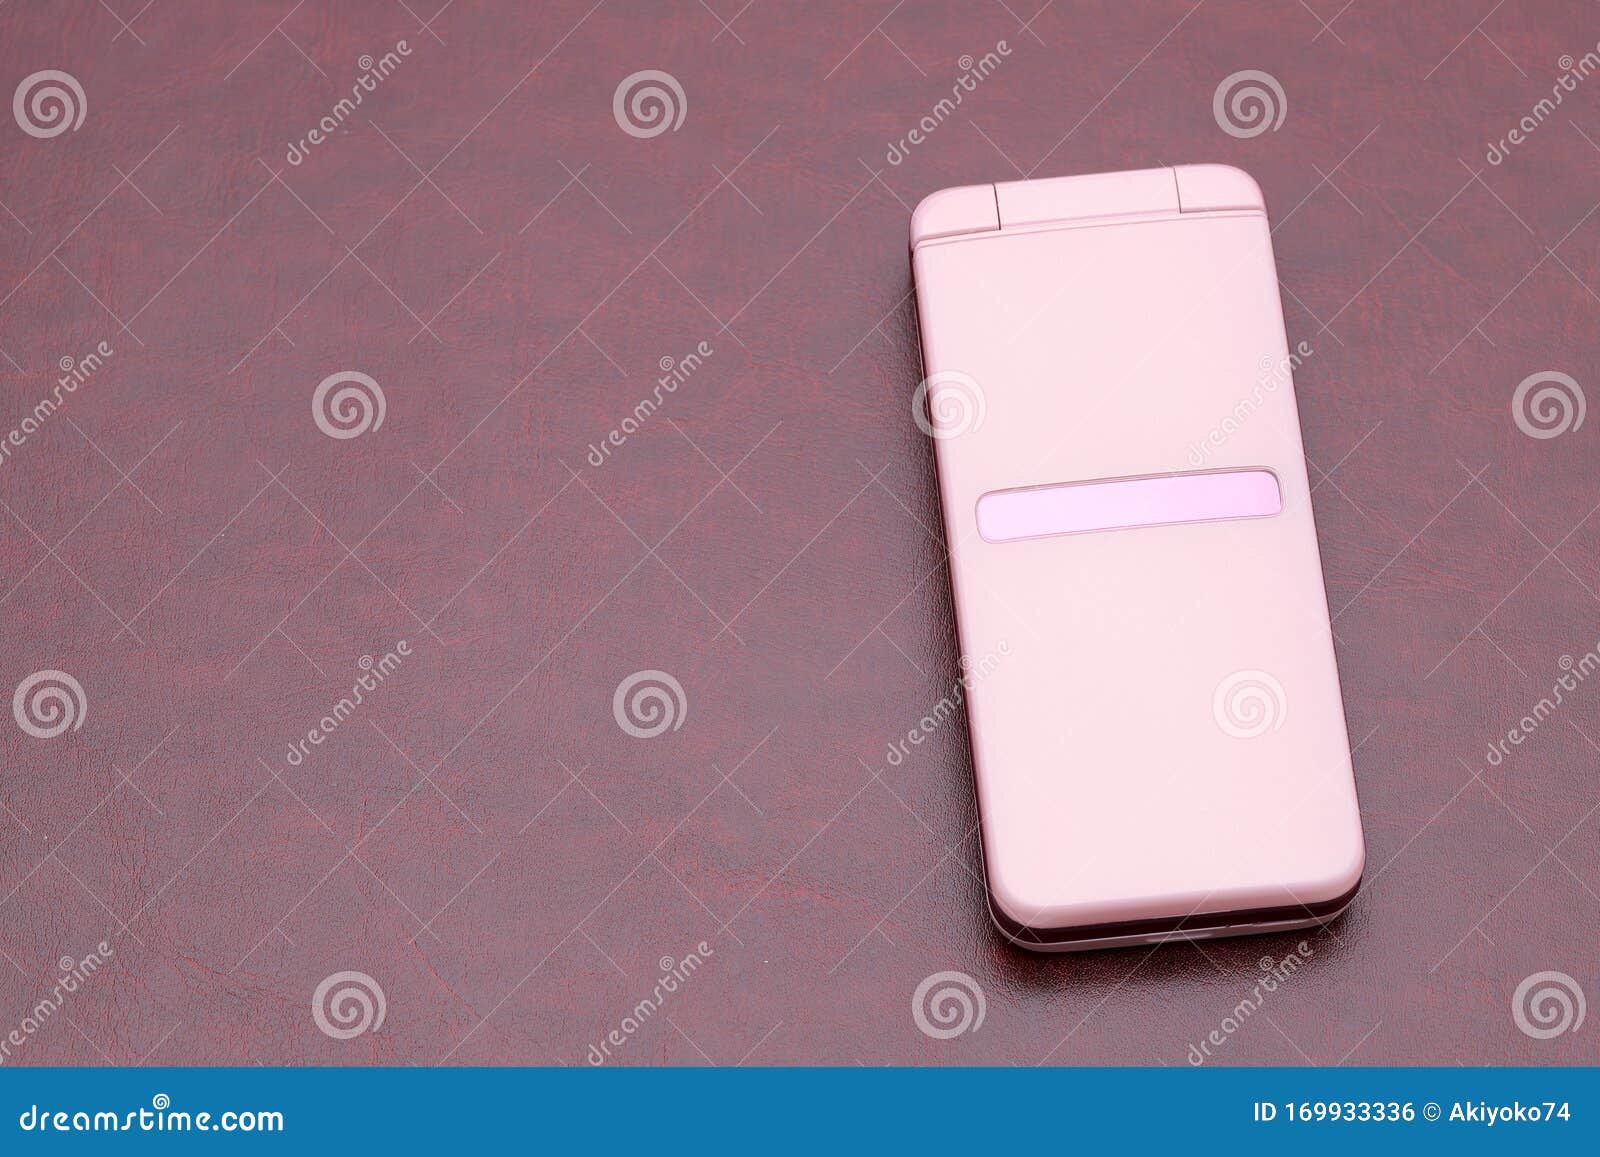 Japanese Mobile Phone on Table Stock Photo - Image of object, phone:  169933336